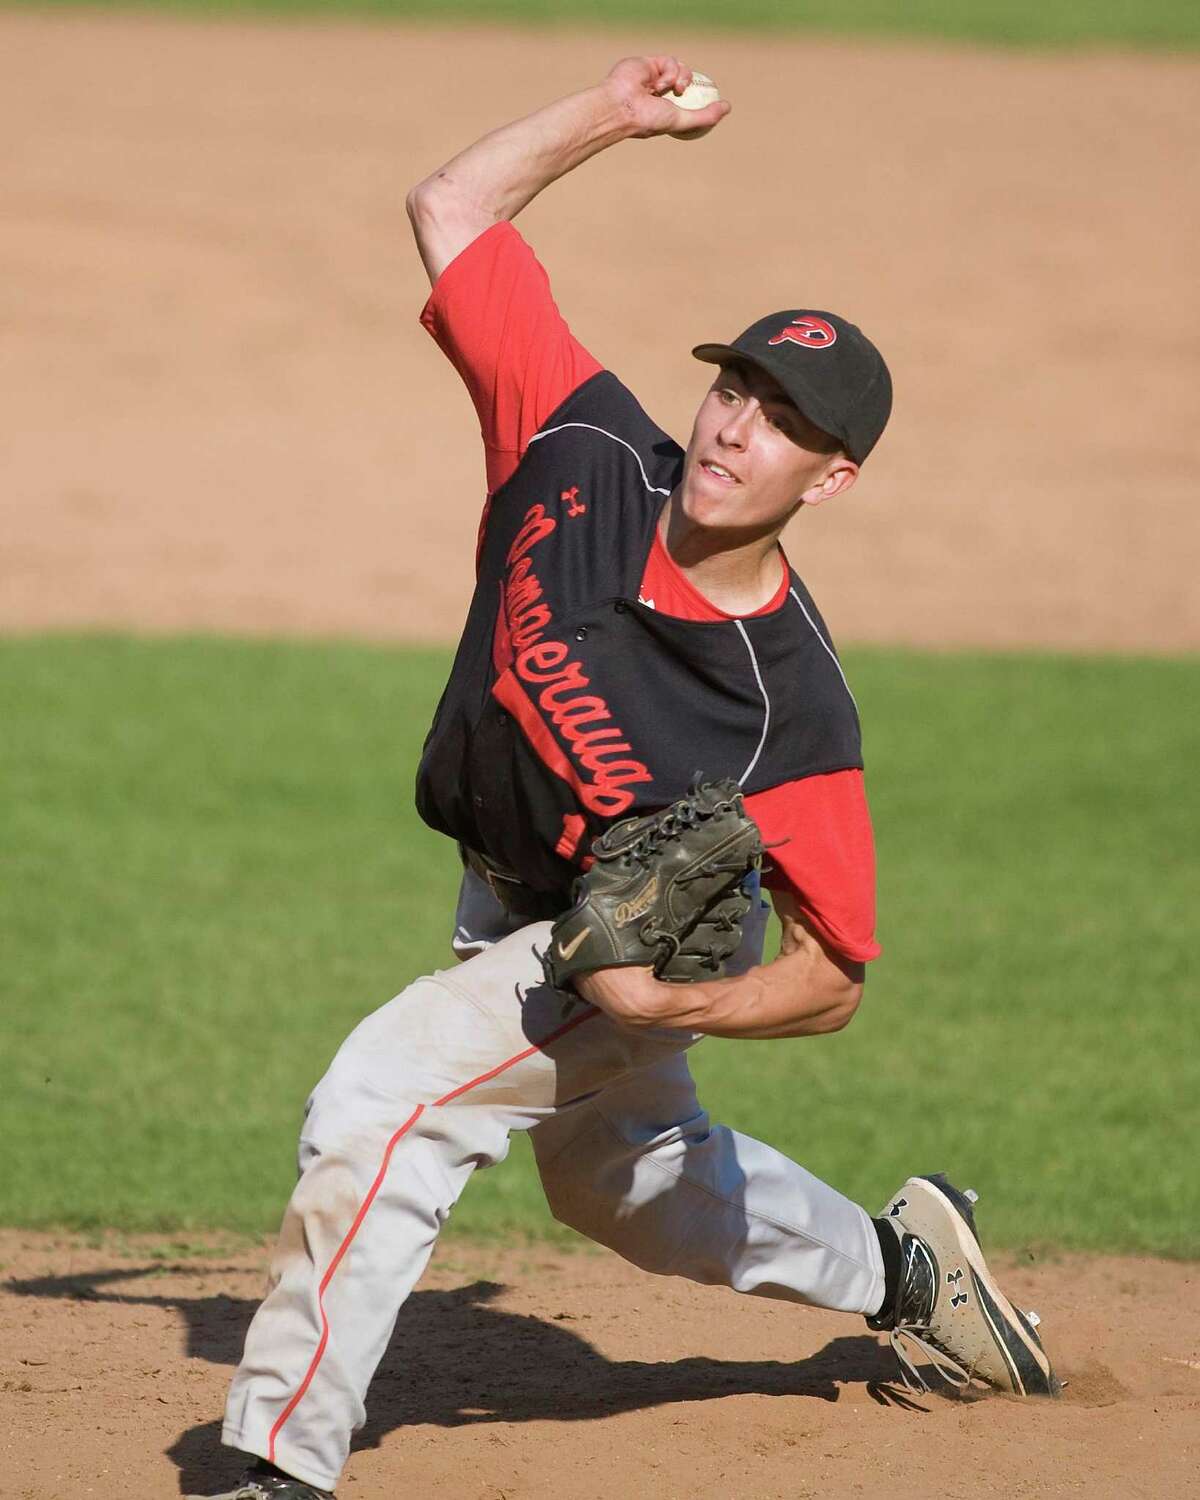 Pomperaug's David Cherry hurled a no-hitter against Immaculate Monday in Danbury.